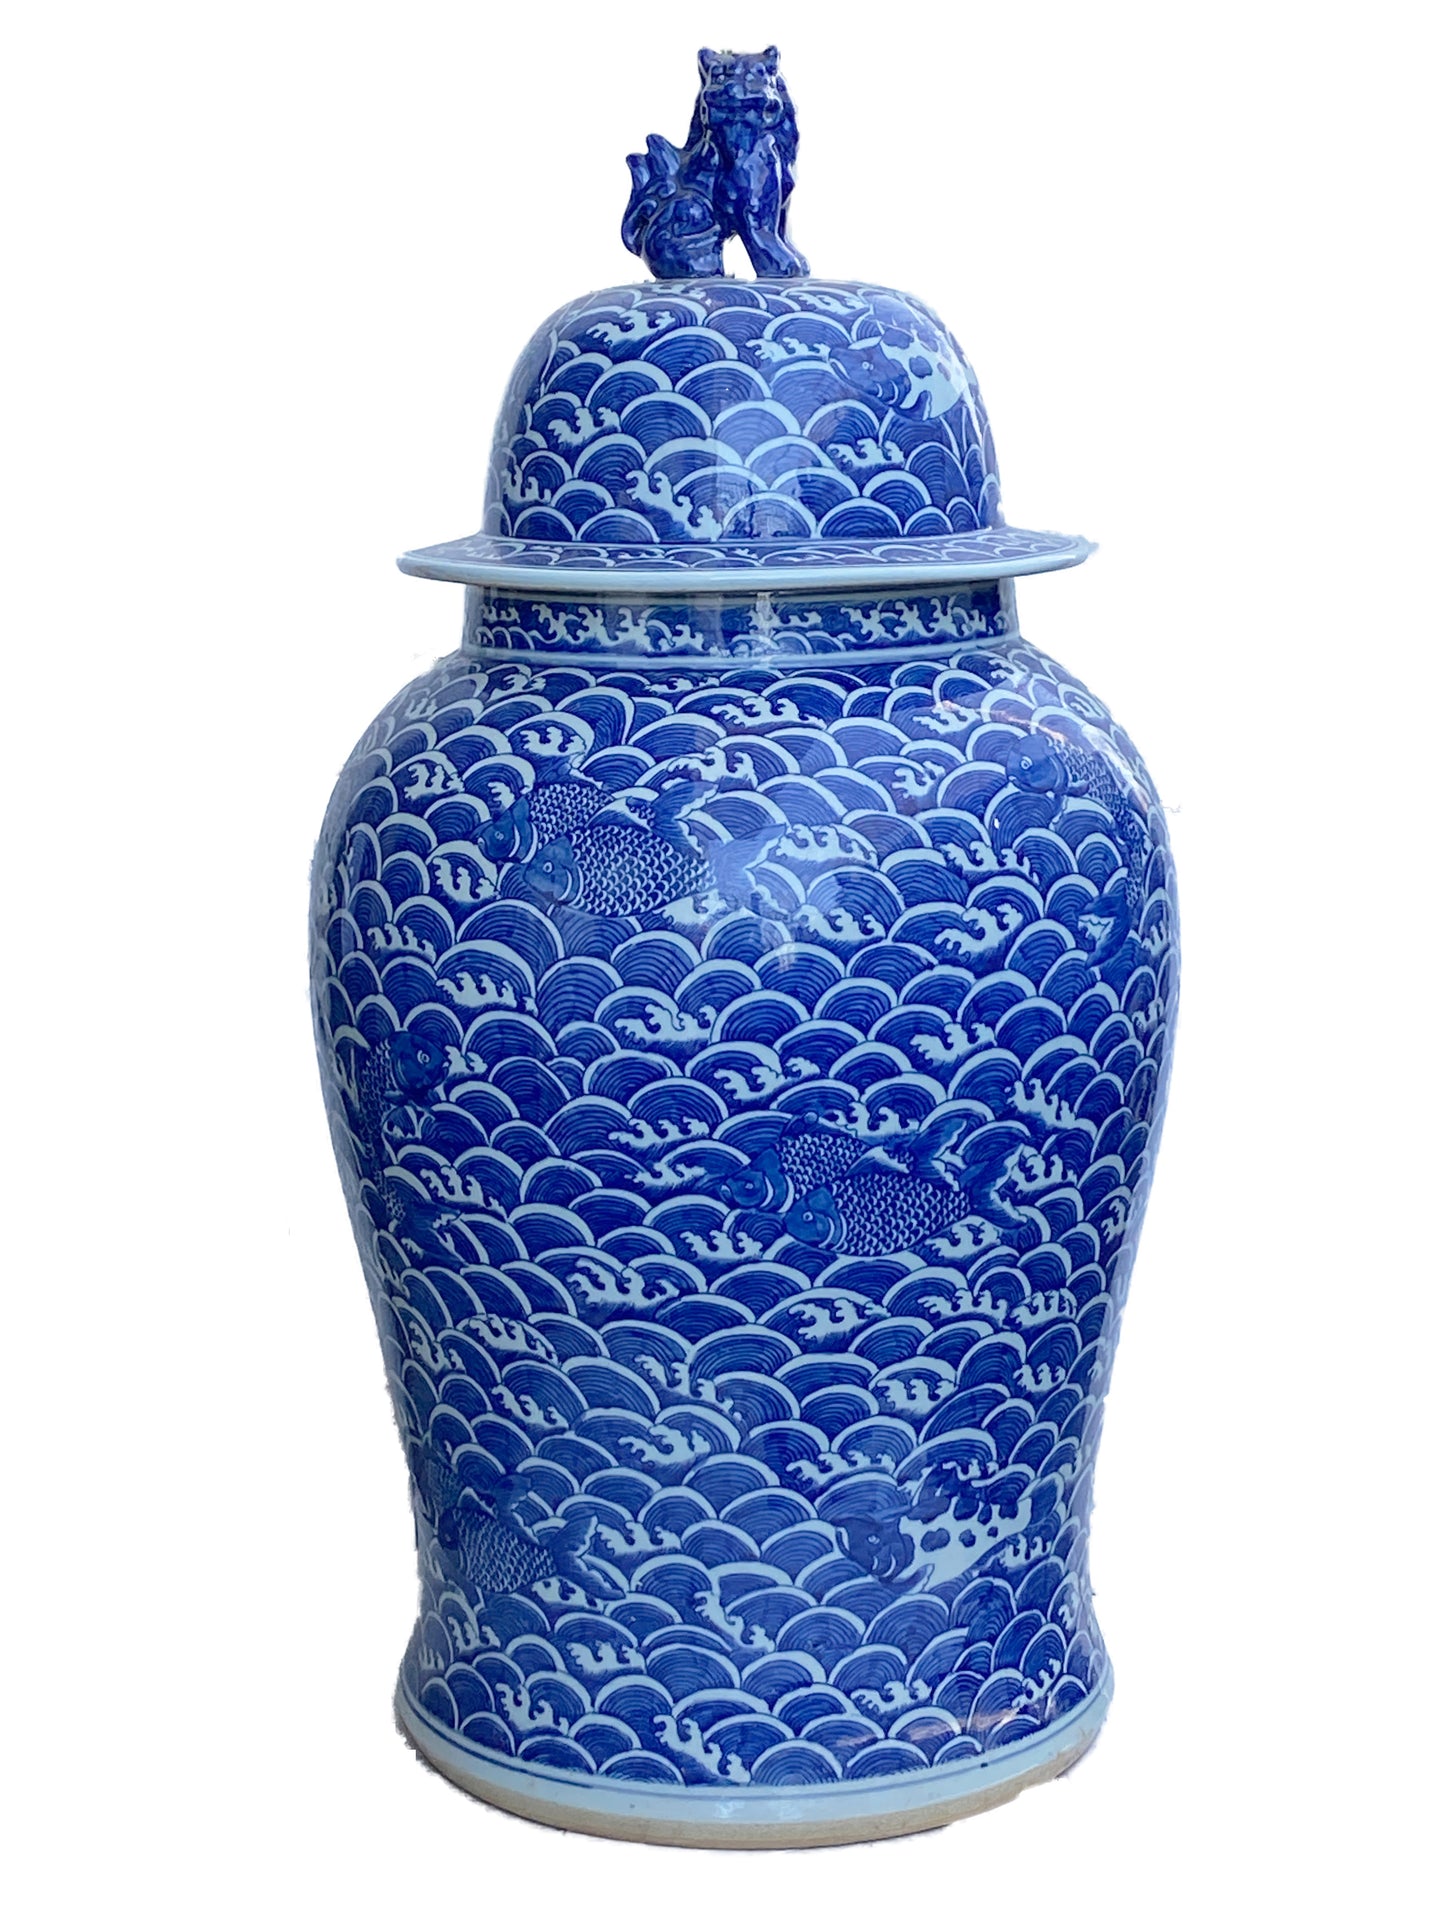 #3508 Superb Chinoiserie Chinese LG Blue and White Porcelain Ginger Jar 38" H